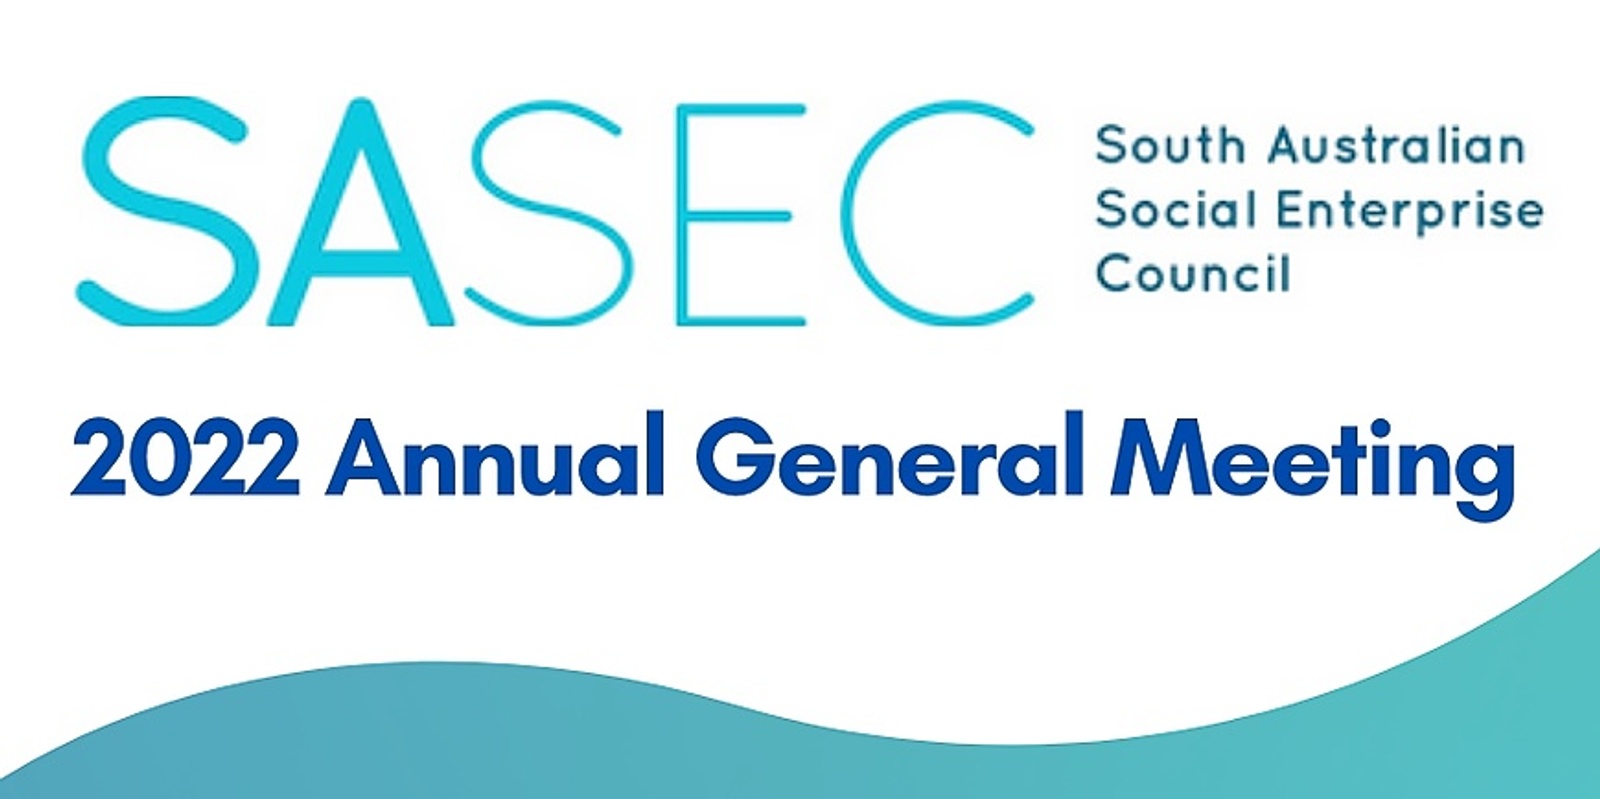 Banner image for 2022 Annual General Meeting for SASEC (with special guest speaker)